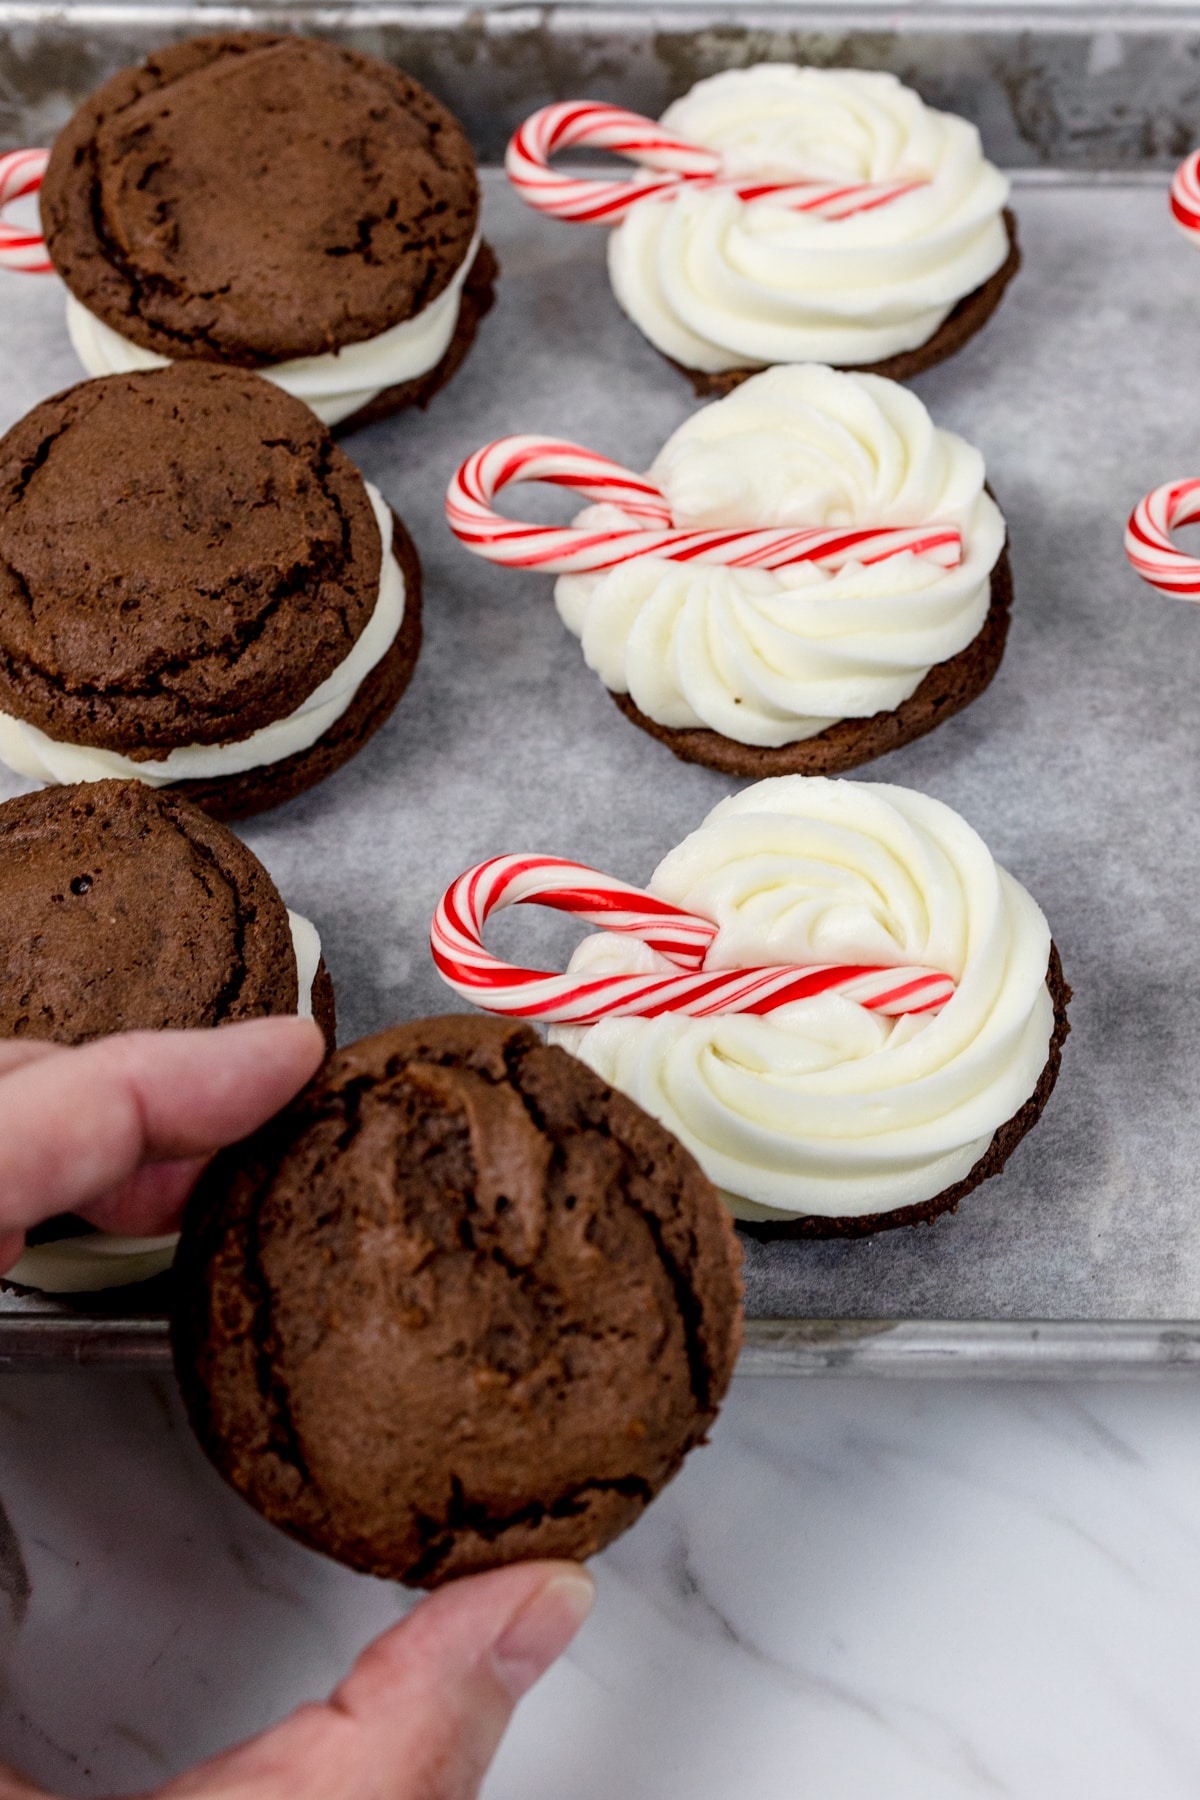 Top view of a cookie being placed on top of a cookie with frosting and a candy cane to make a cookie sandwich. 